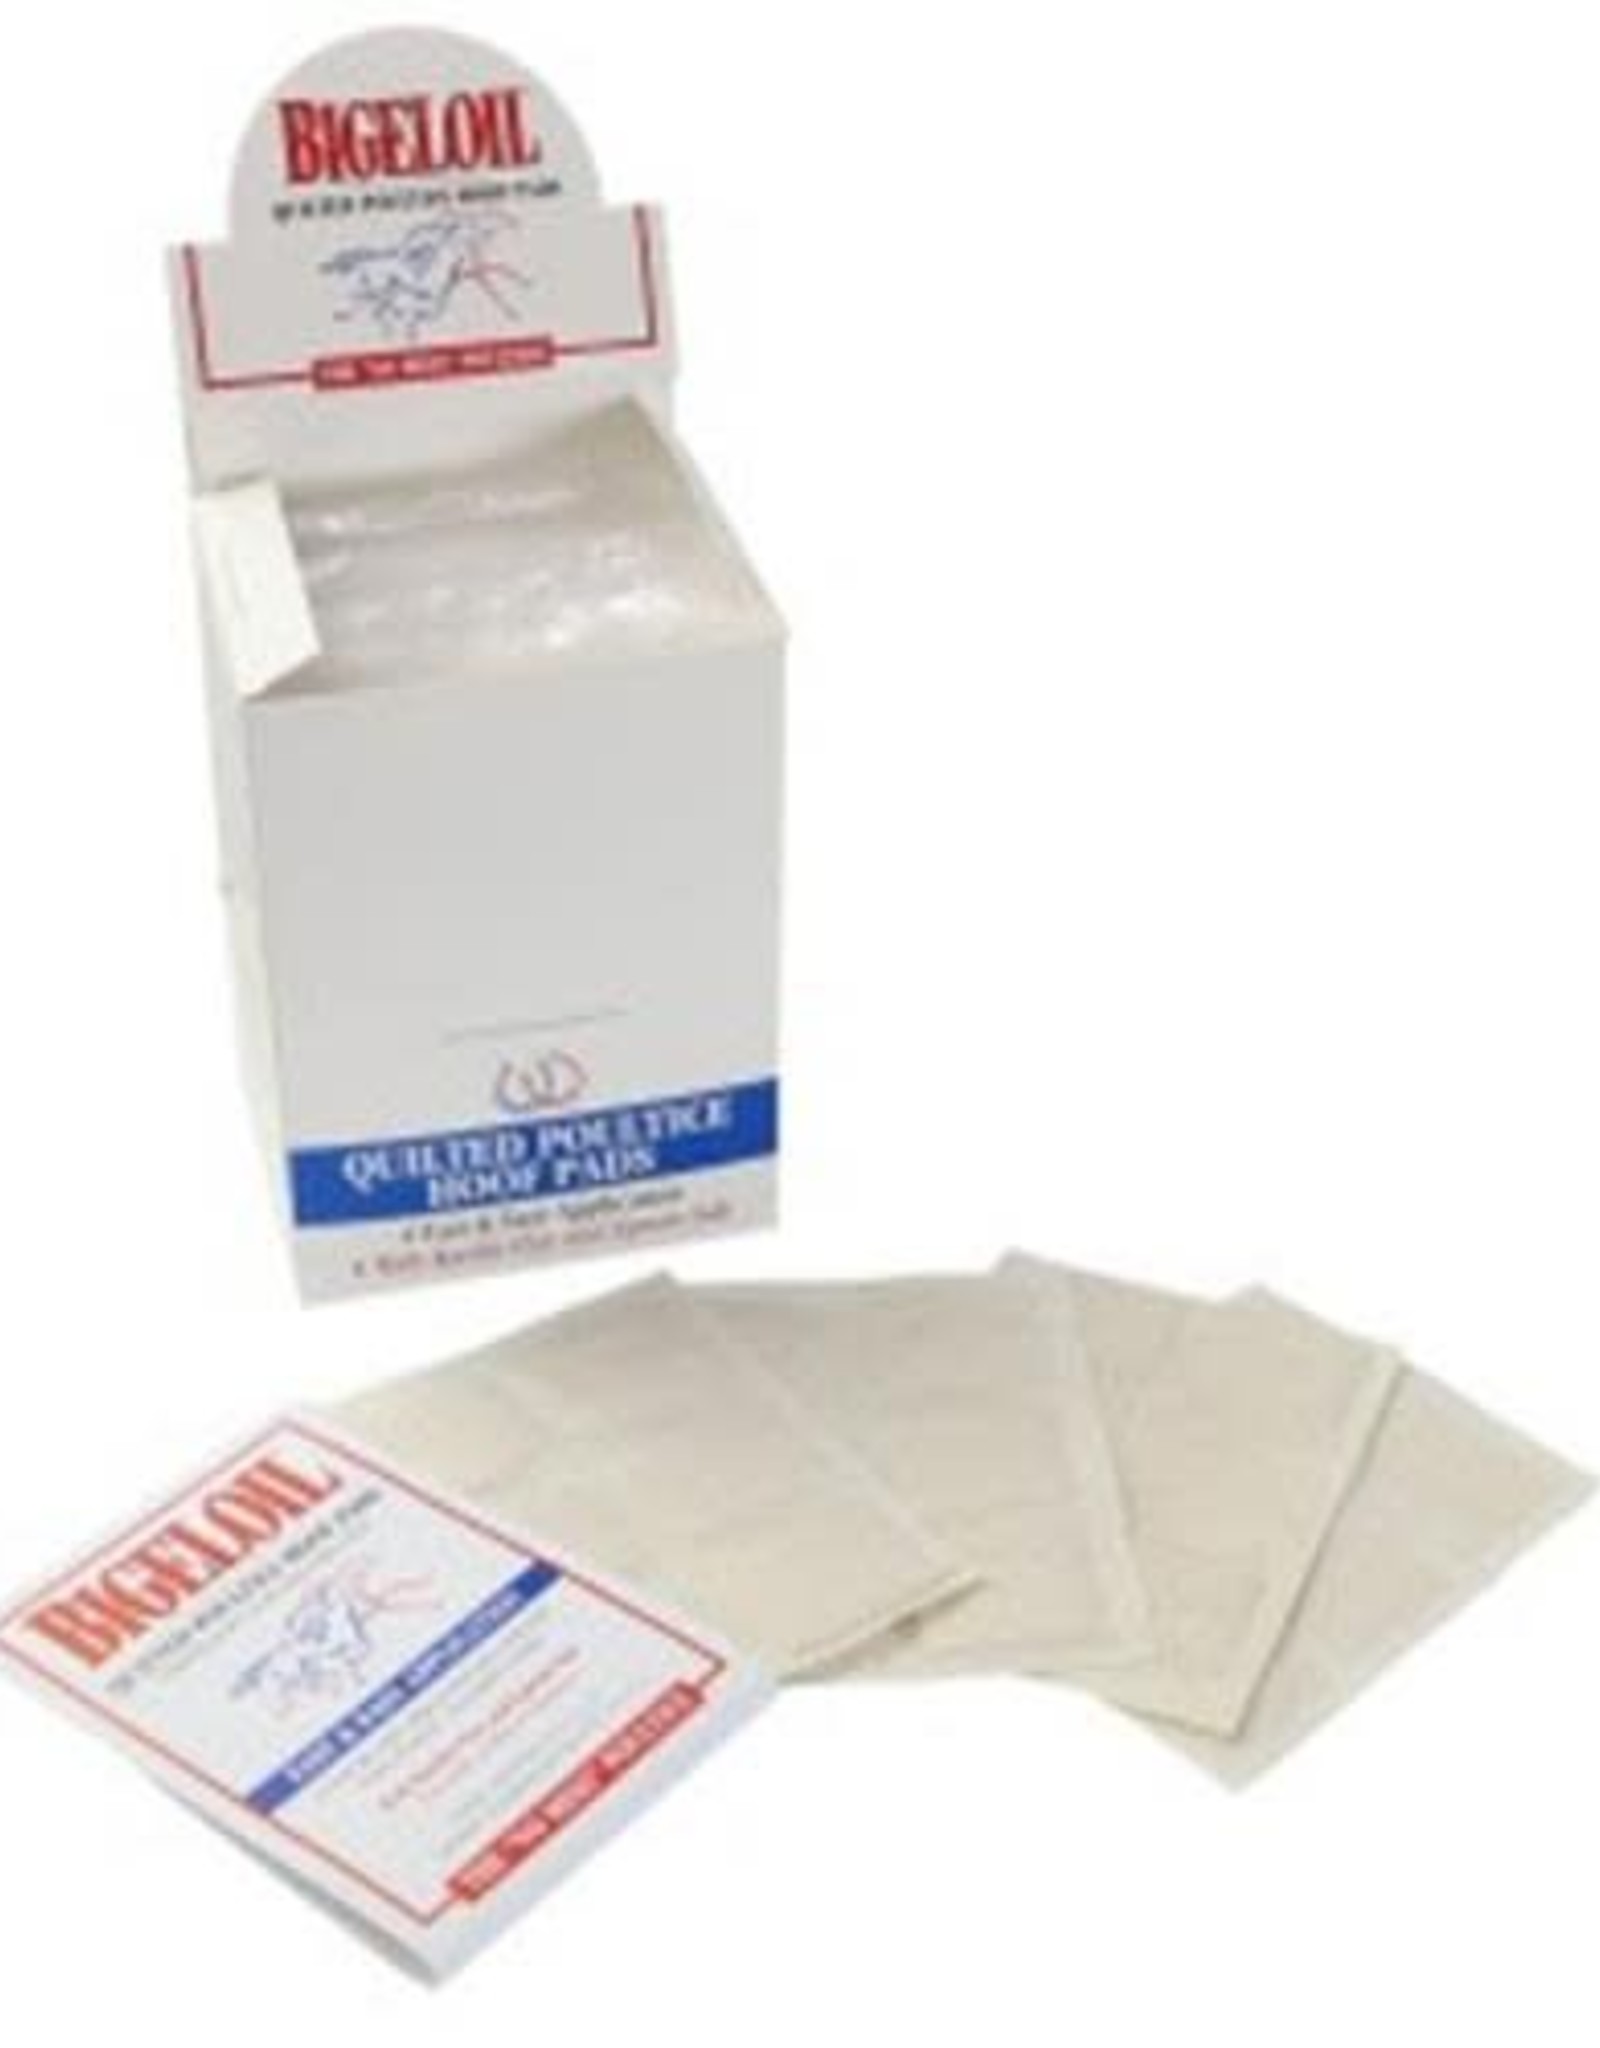 Bigeloil Quilted Poultice Hoof Pads